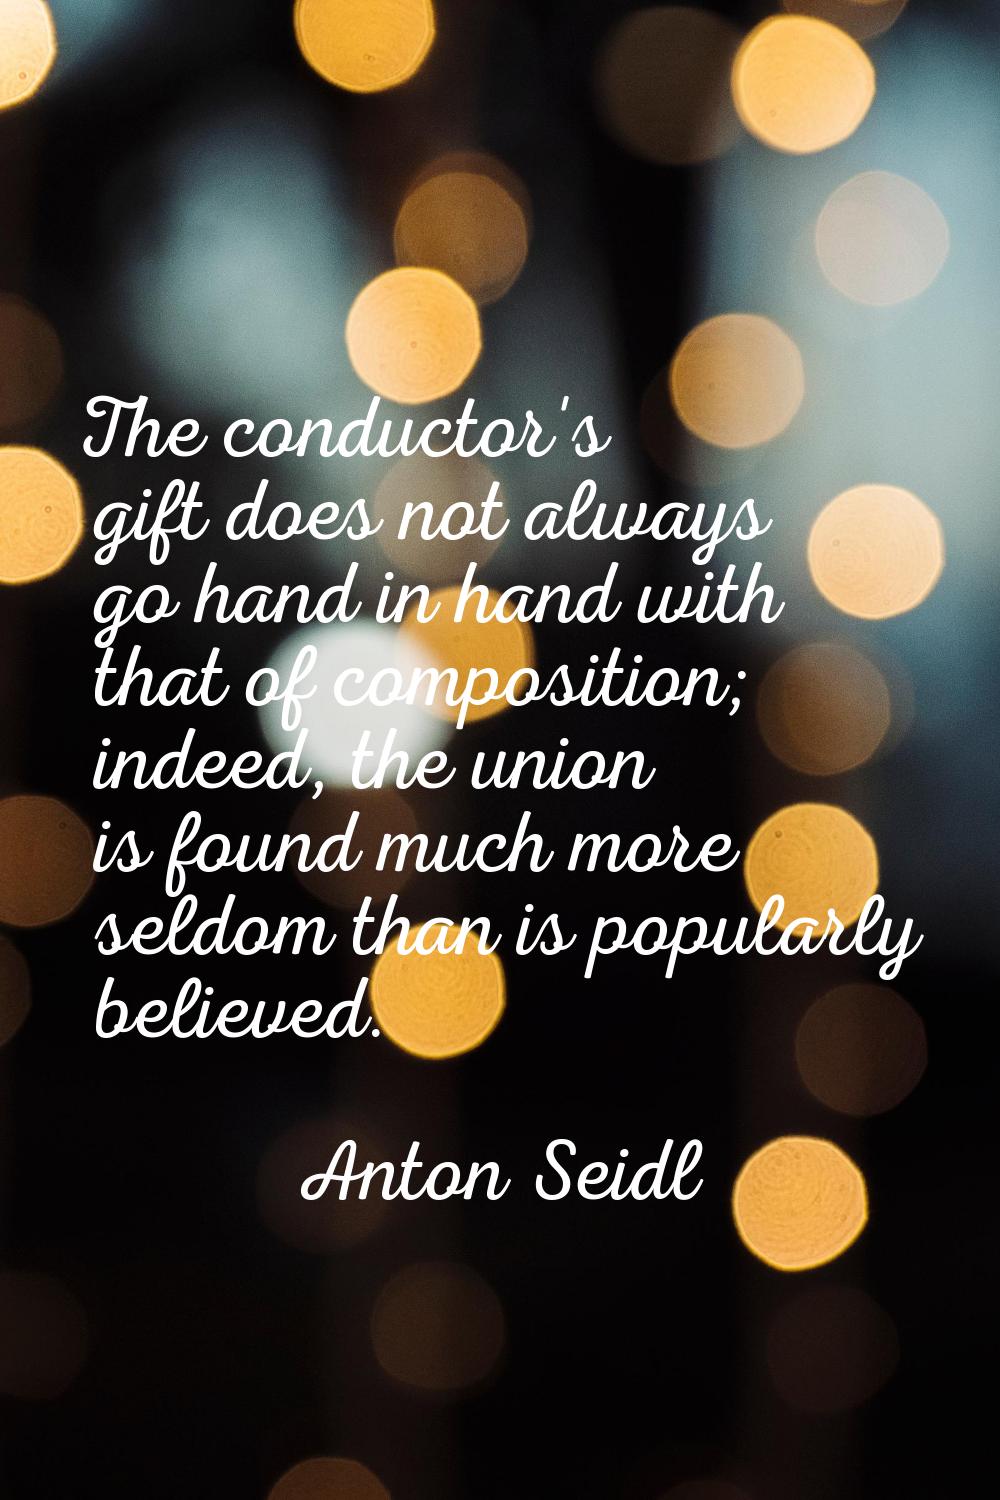 The conductor's gift does not always go hand in hand with that of composition; indeed, the union is